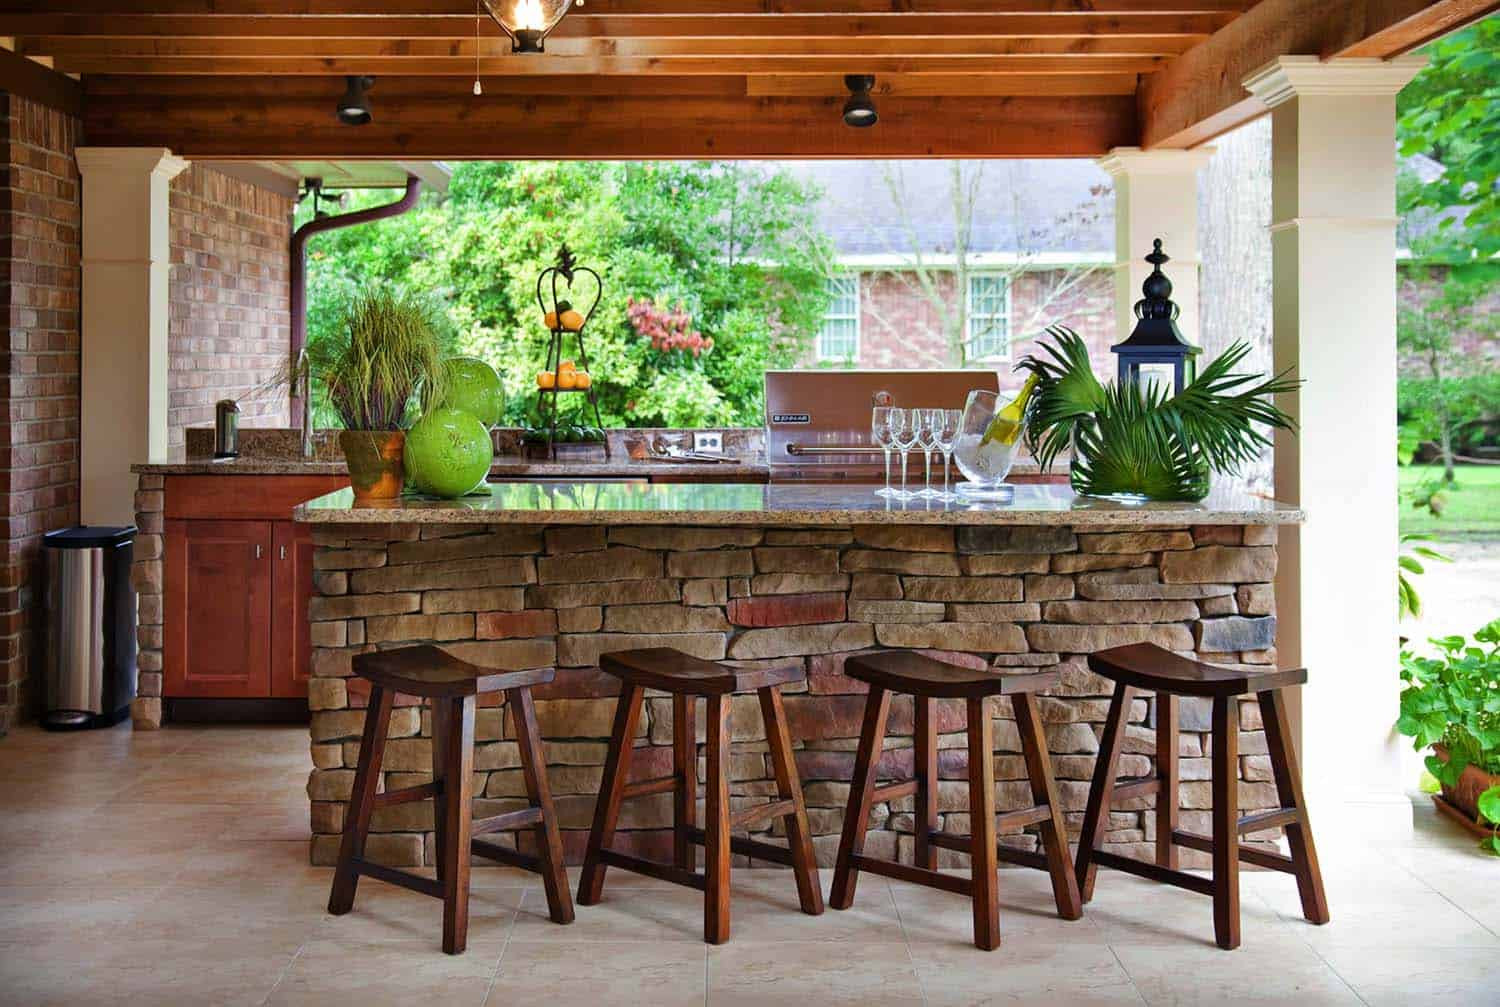 Outdoor Kitchen Designs Plans
 20 Spectacular outdoor kitchens with bars for entertaining